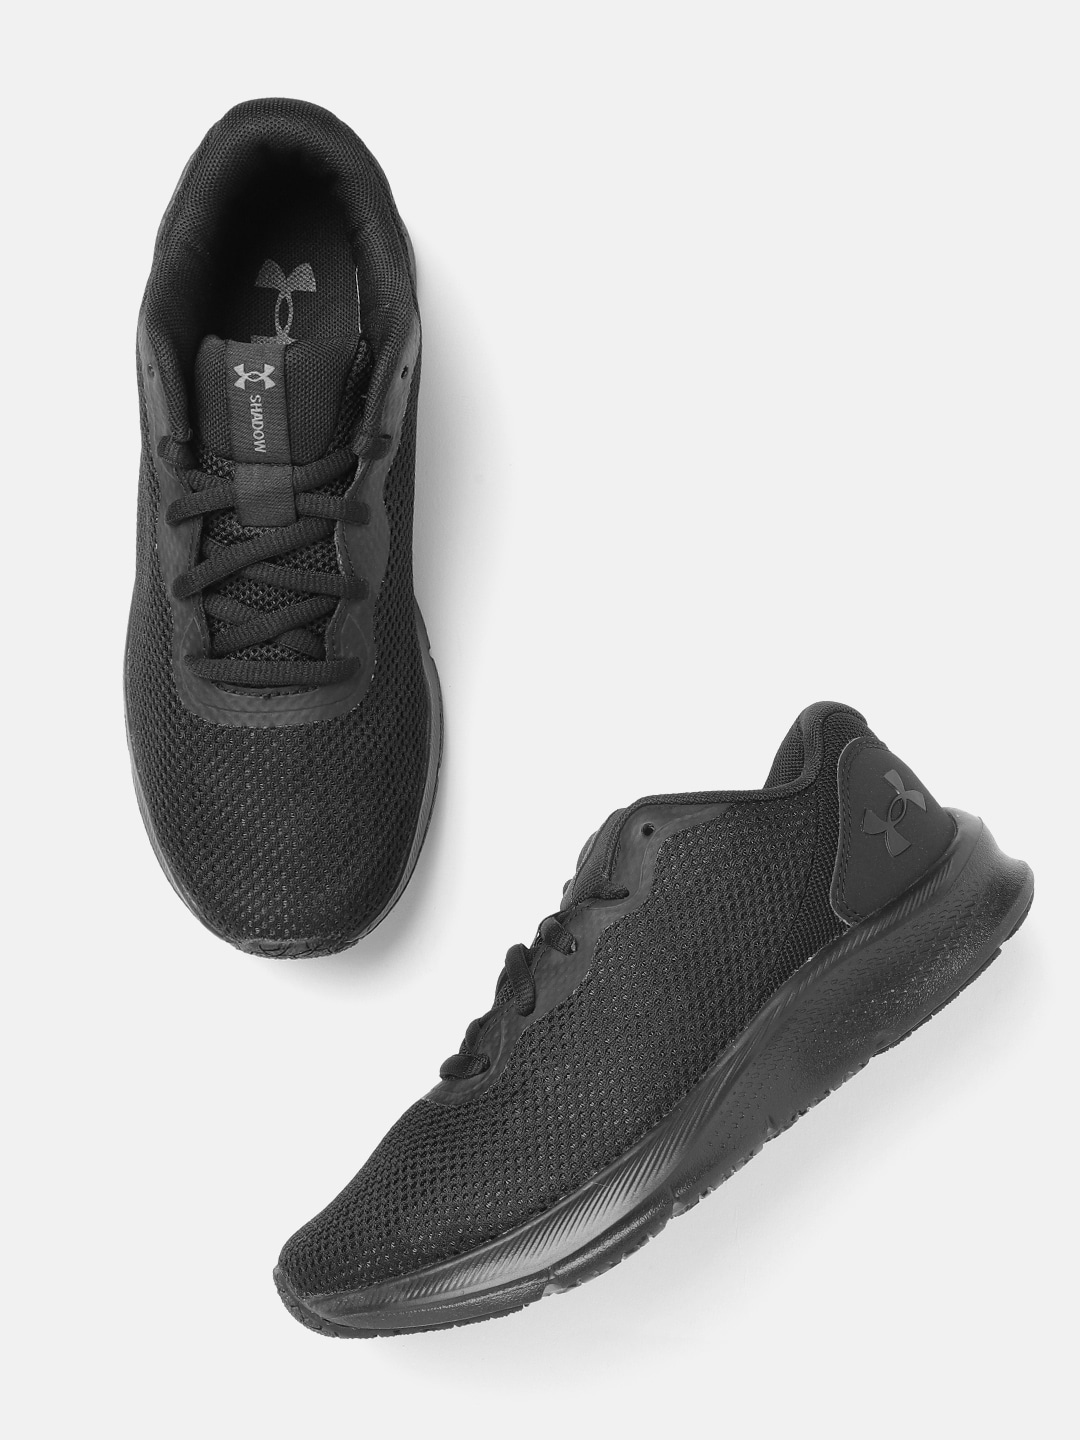 UNDER ARMOUR Women Black Woven Design Shadow Running Shoes Price in India